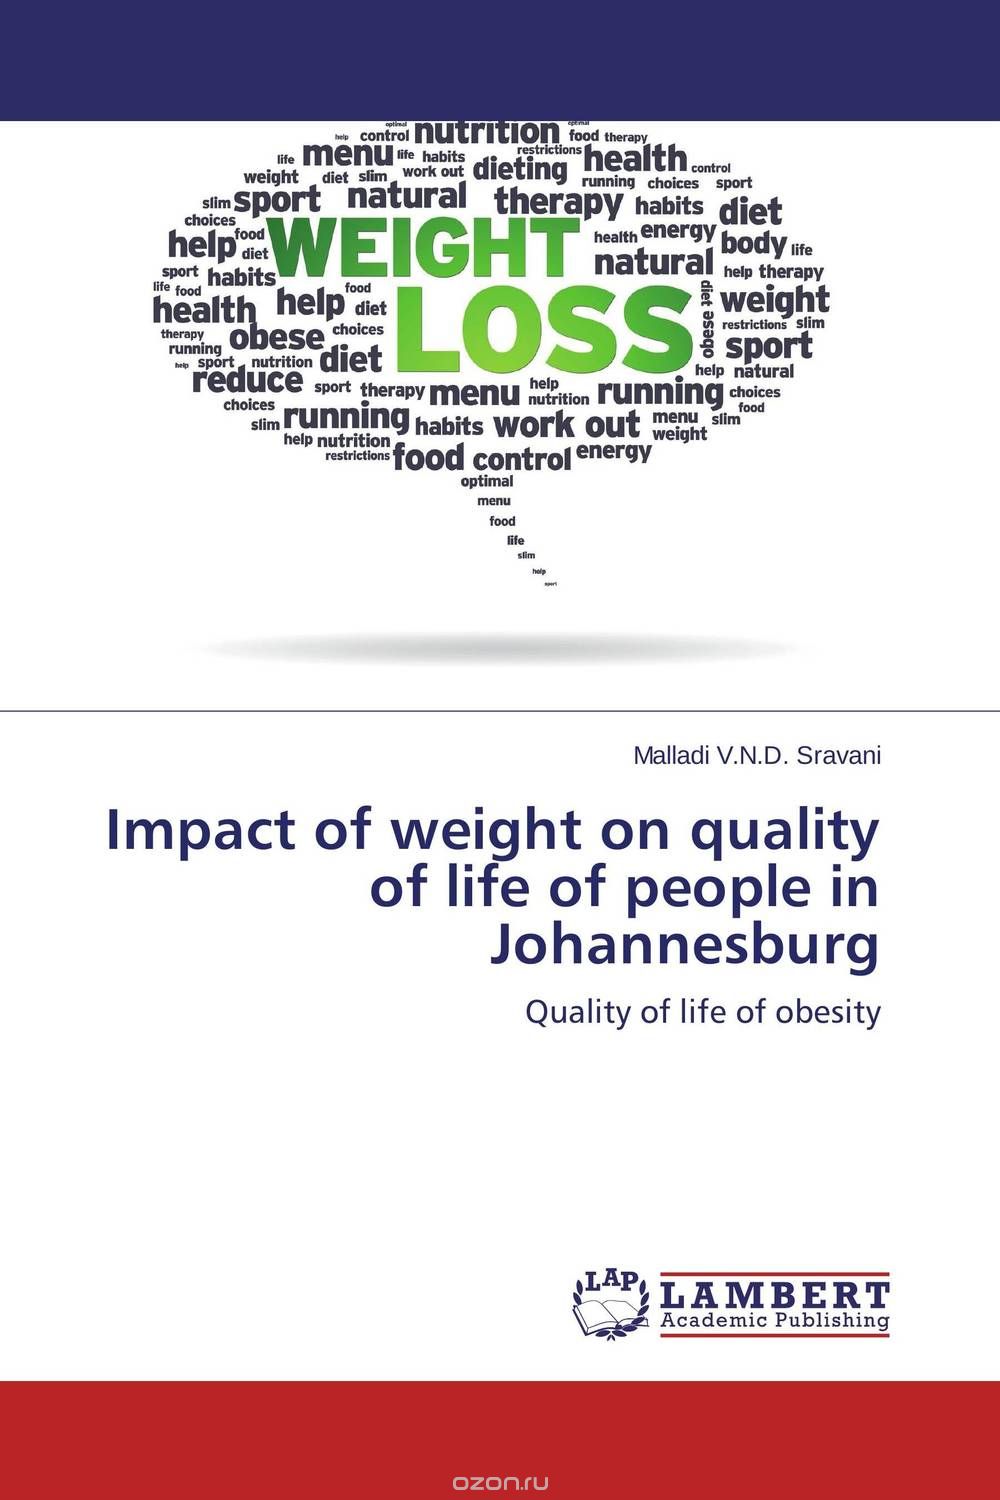 Impact of weight on quality of life of people in Johannesburg